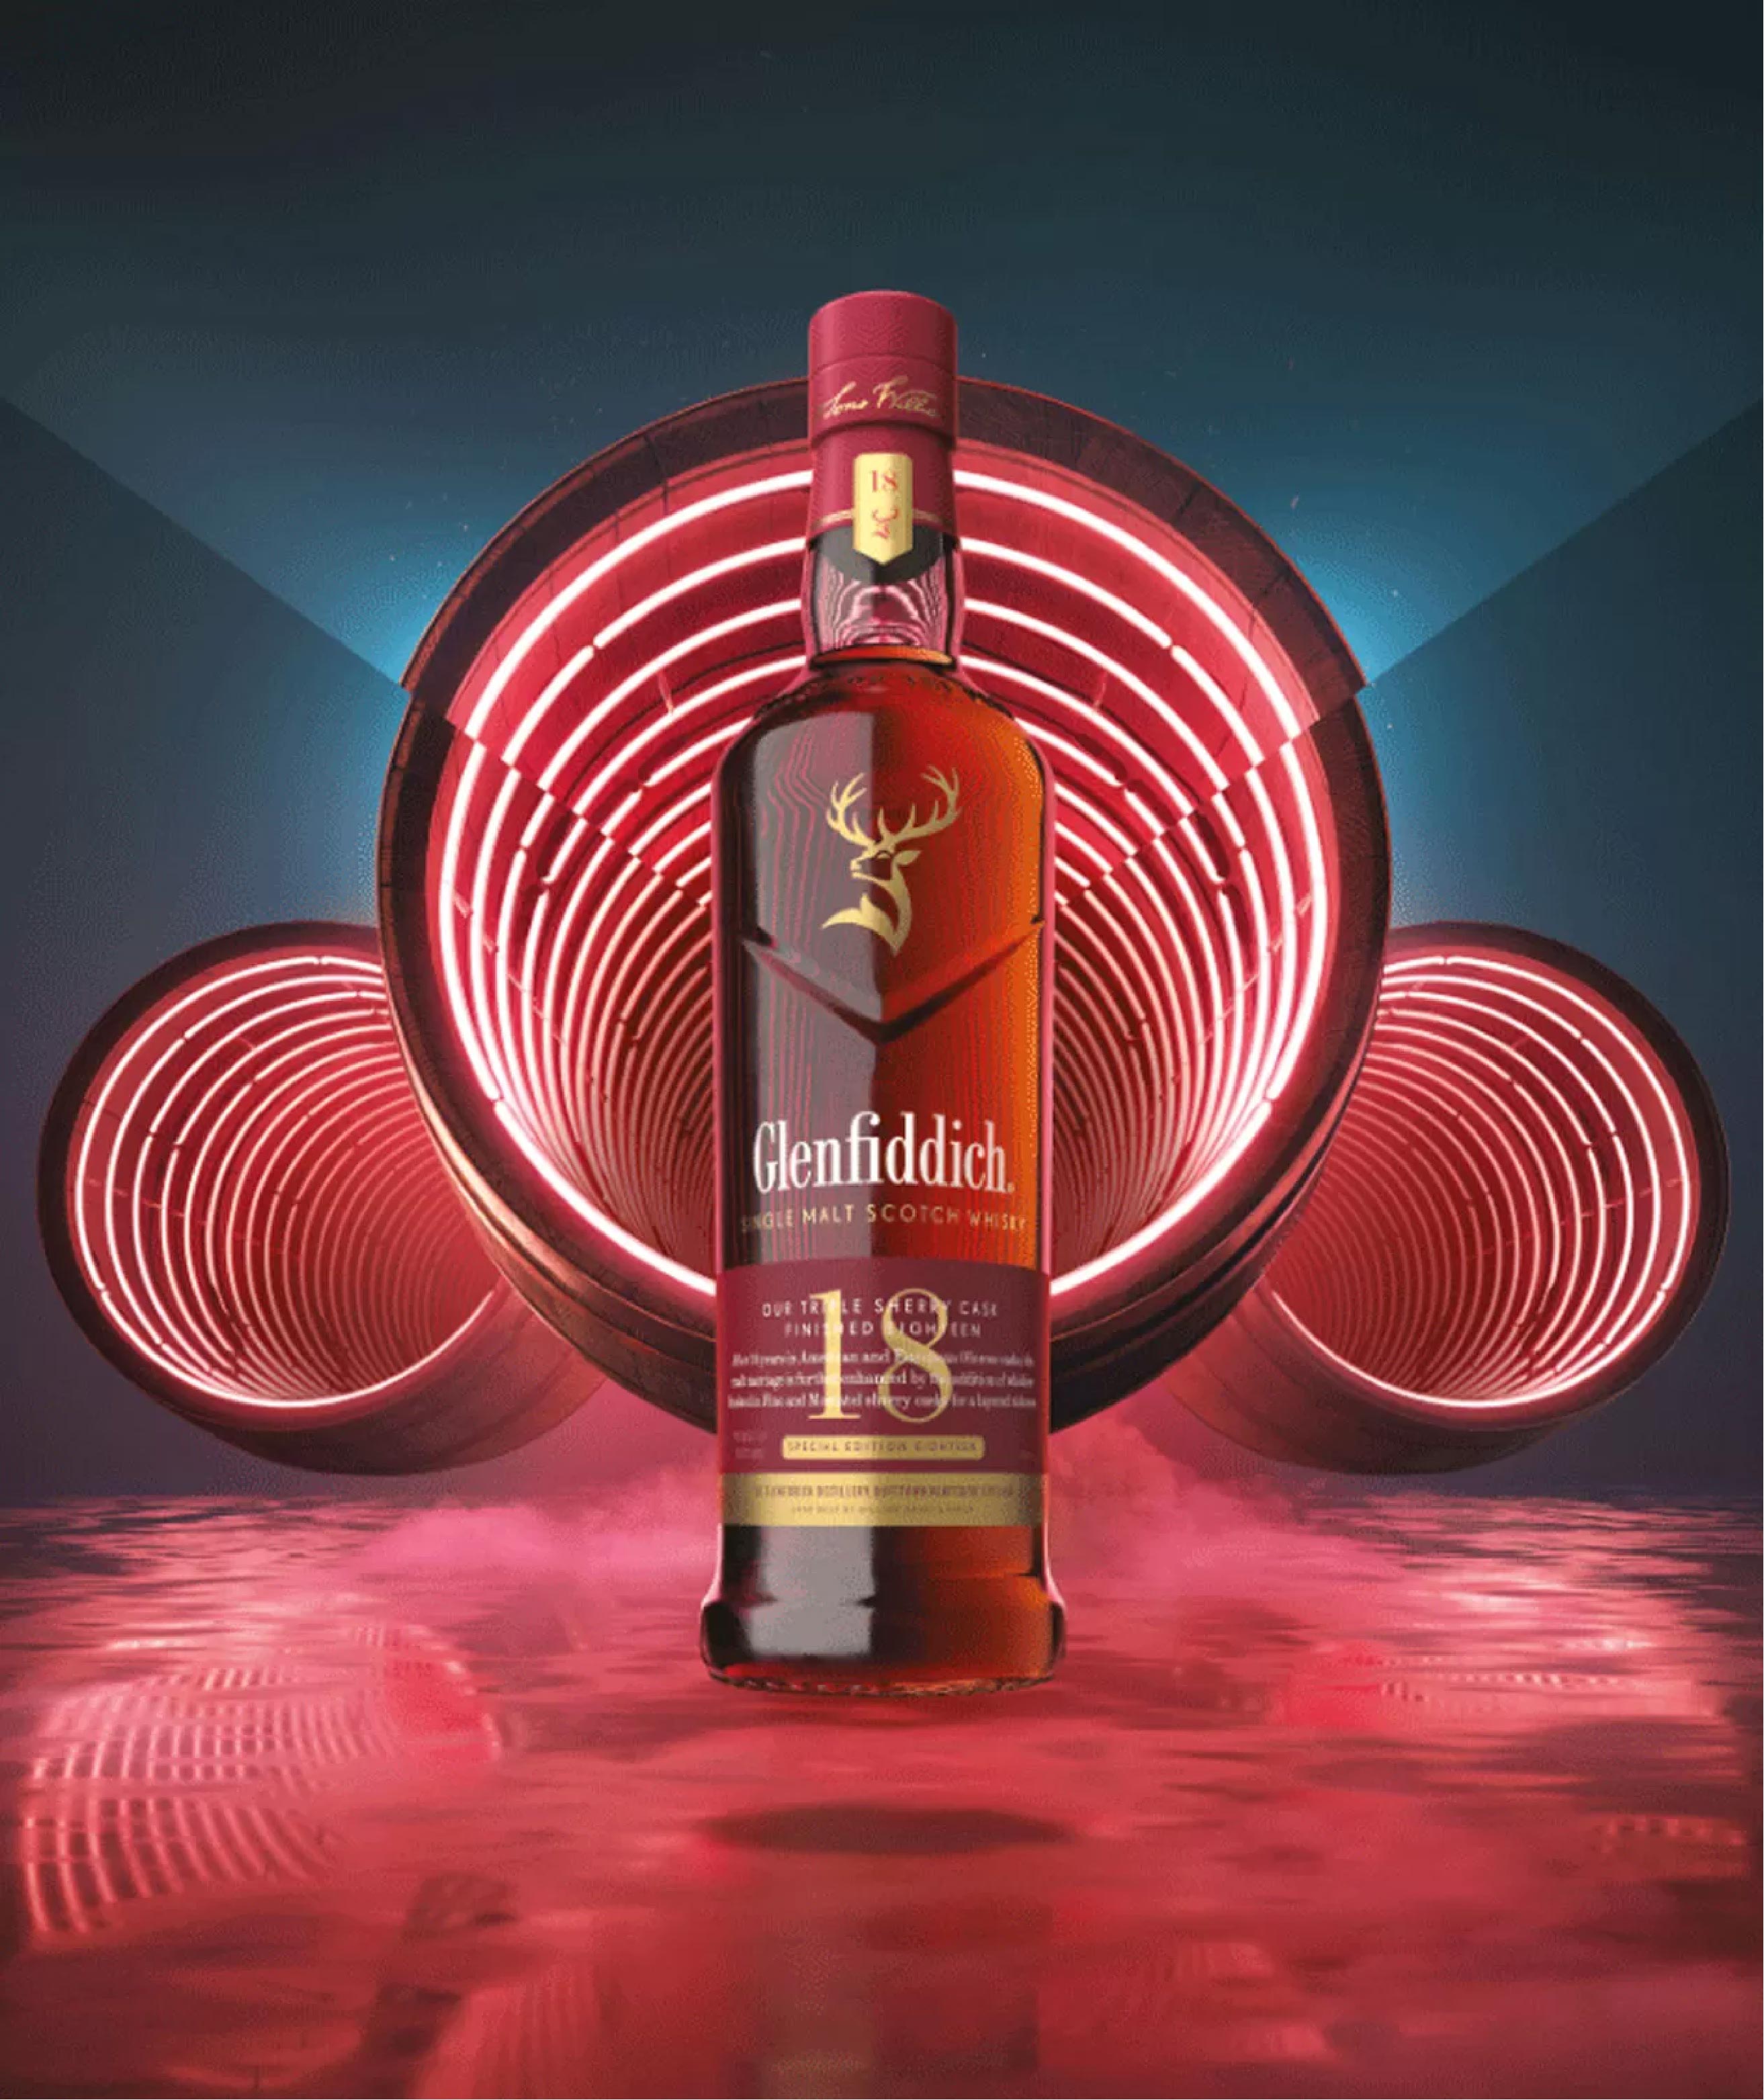 Glenfiddich 18 Year old Sherry bottle in artistic style